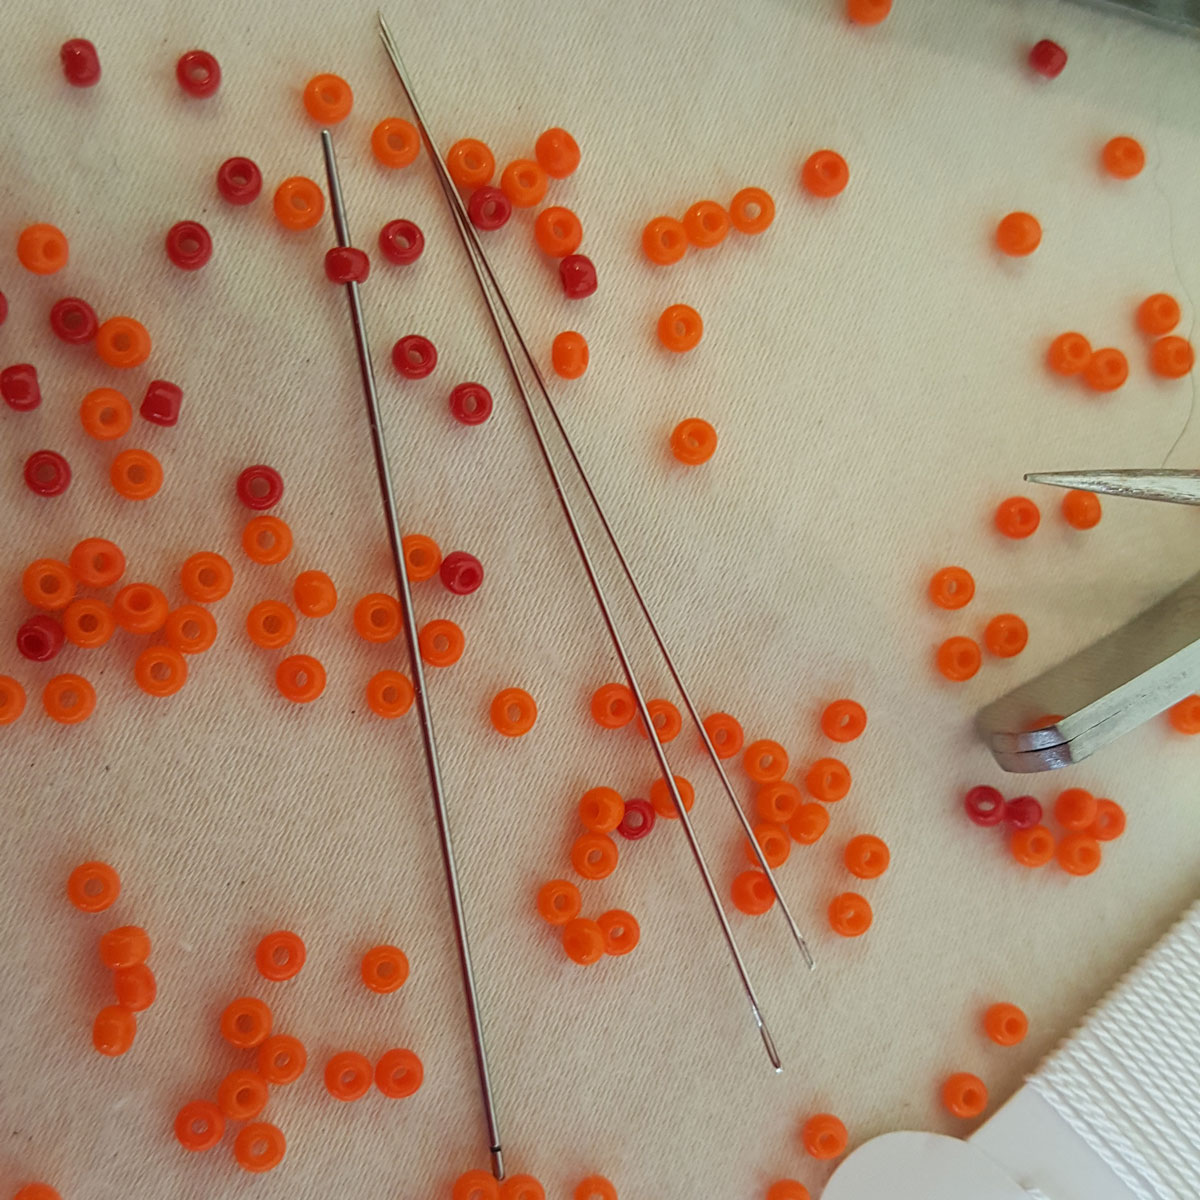 Beading needles with seed beads